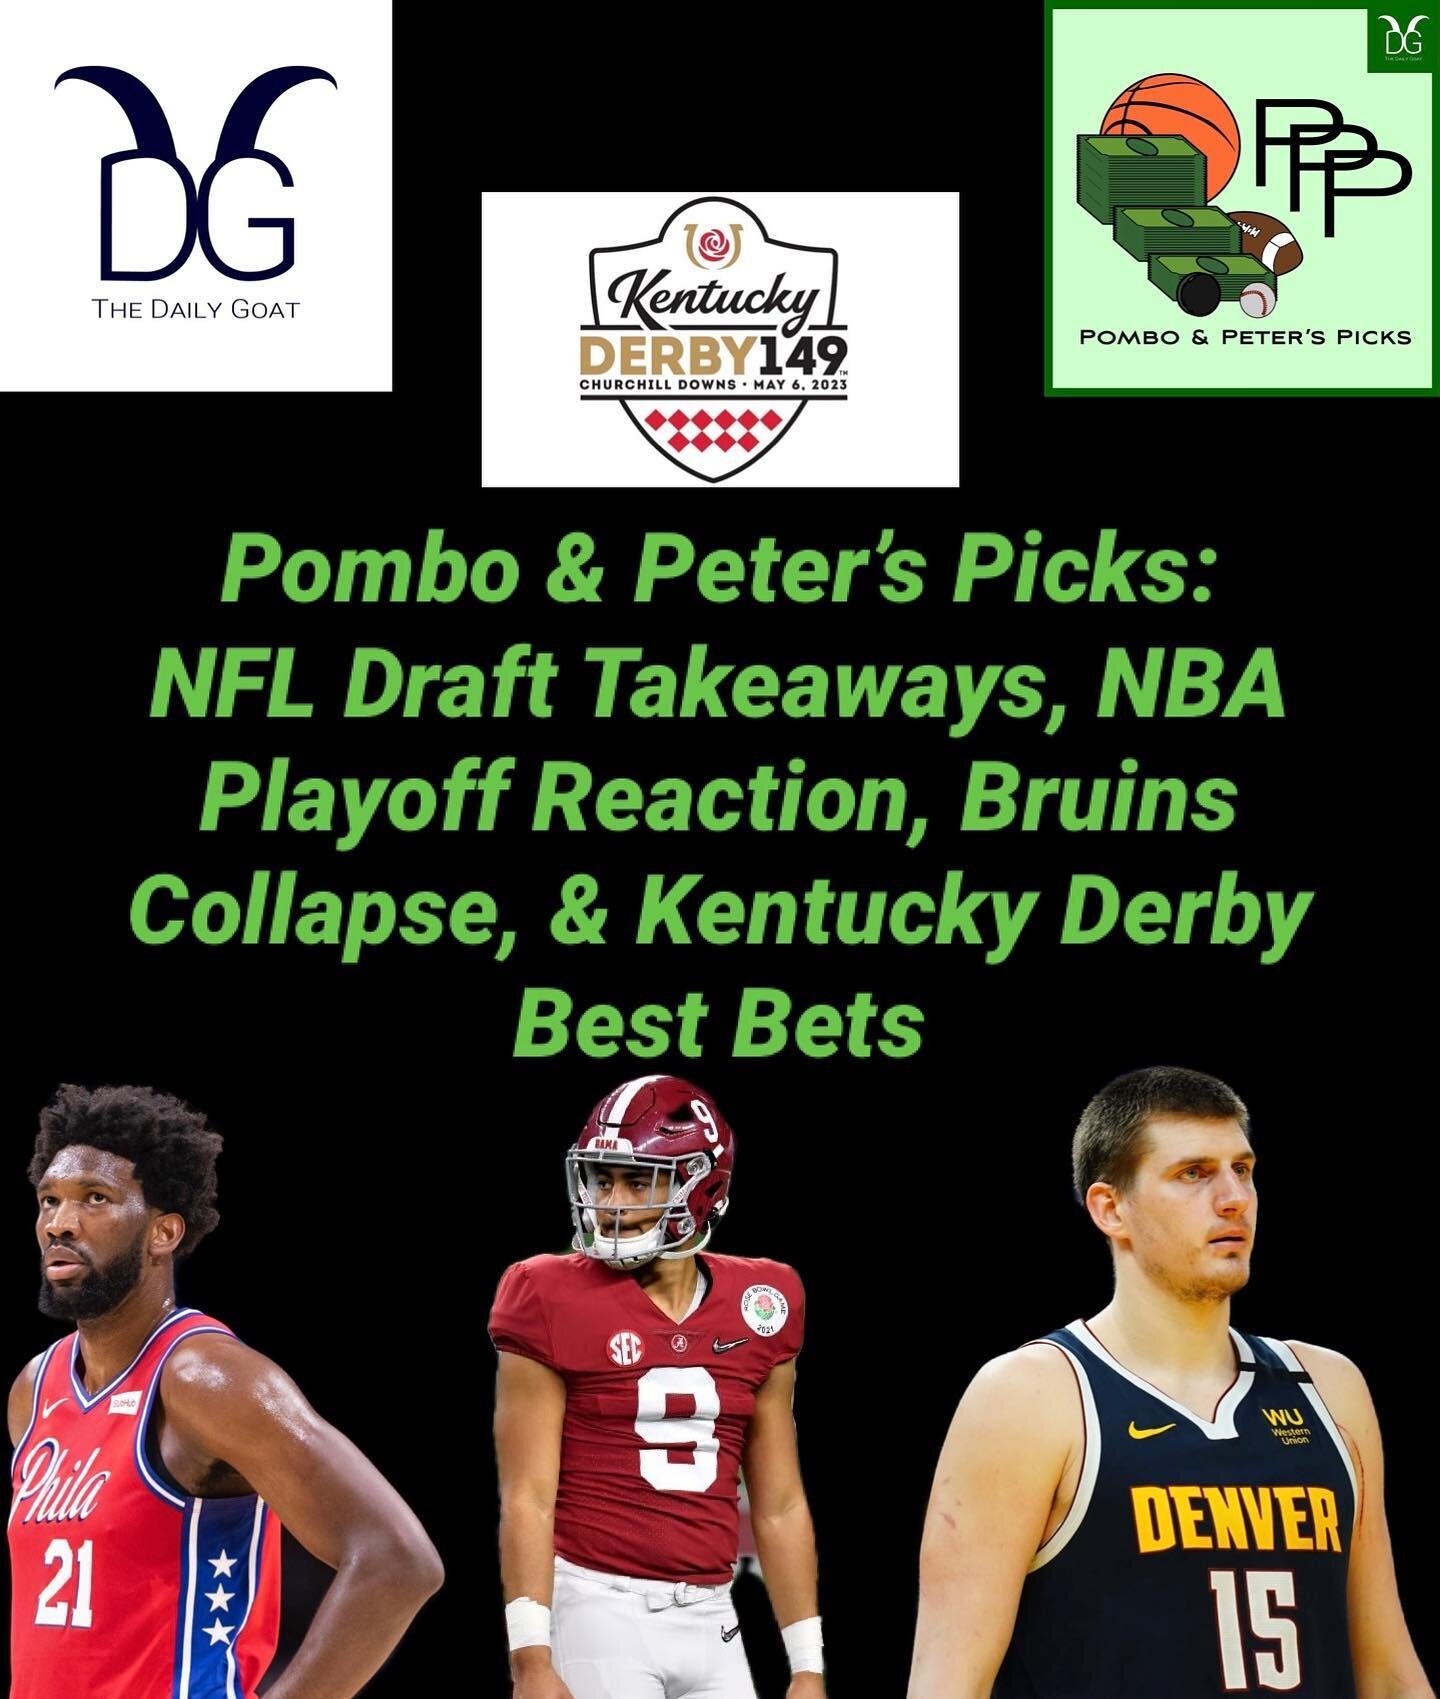 The new episode of @_pppicks with @jpombo24 &amp; @peteralves52 is out!

🏈 They recap the NFL Draft.

🏀 They discuss the latest in the NBA Playoffs.

🐻 They discuss the Bruins&rsquo; collapse.

🐎 Best bets for the Kentucky Derby.

Link on our 👉 